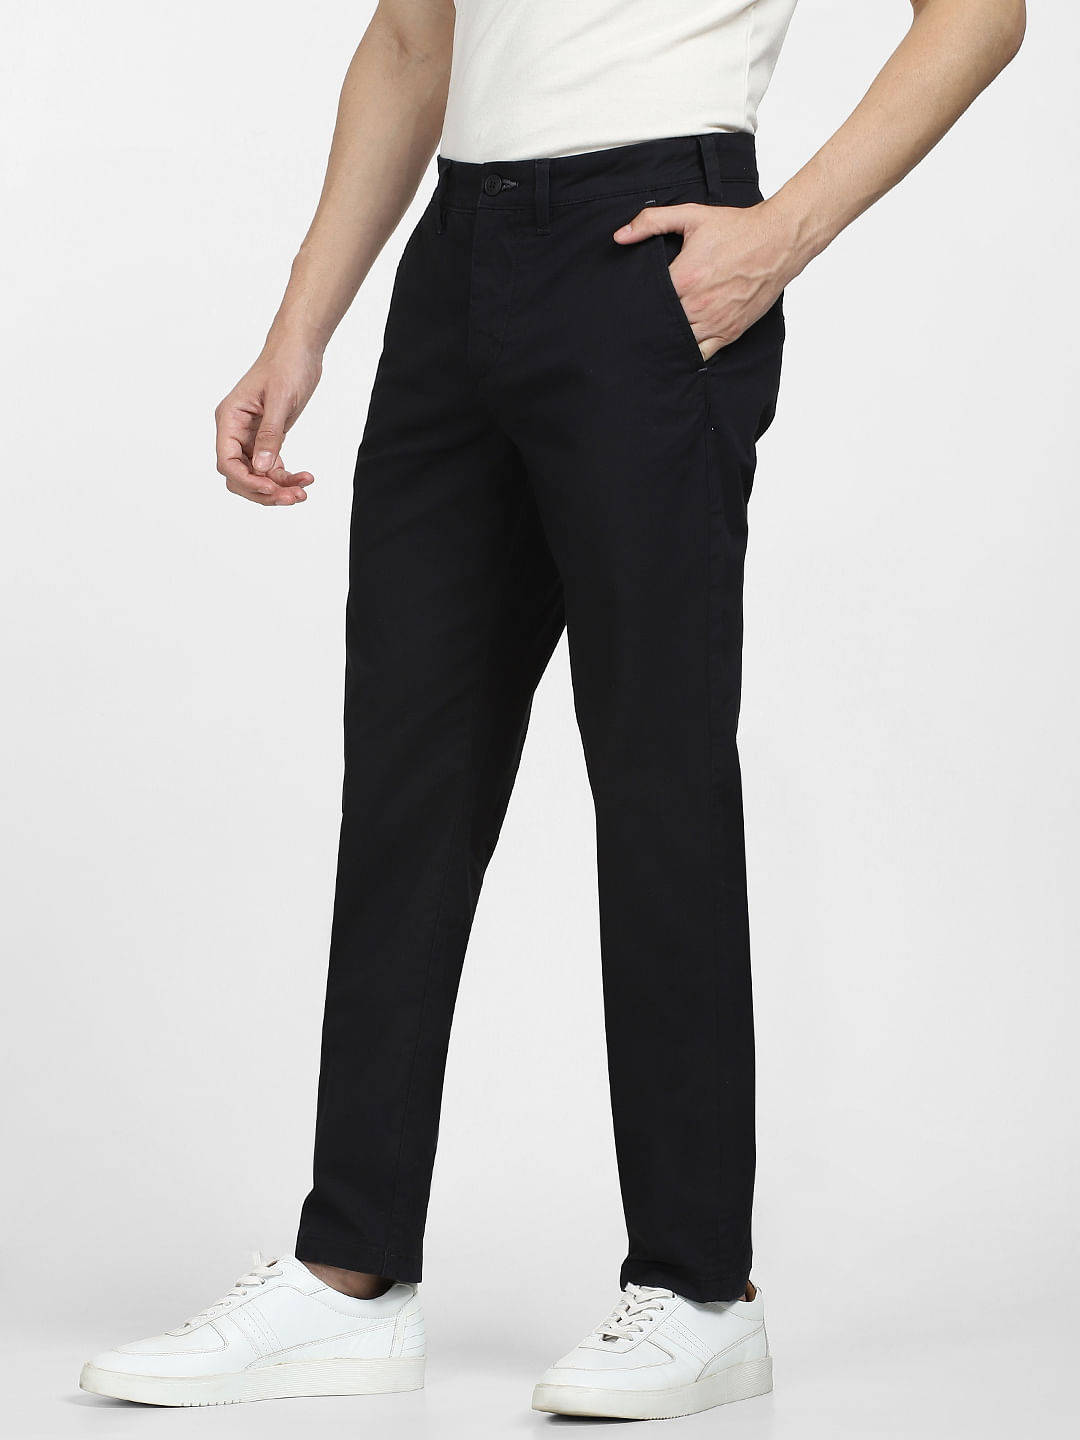 Buy men in class Black Chinos Pants for Men Chinos for Men Slim fit Chinos  Trousers for Mens Checked Chinos at Amazon.in